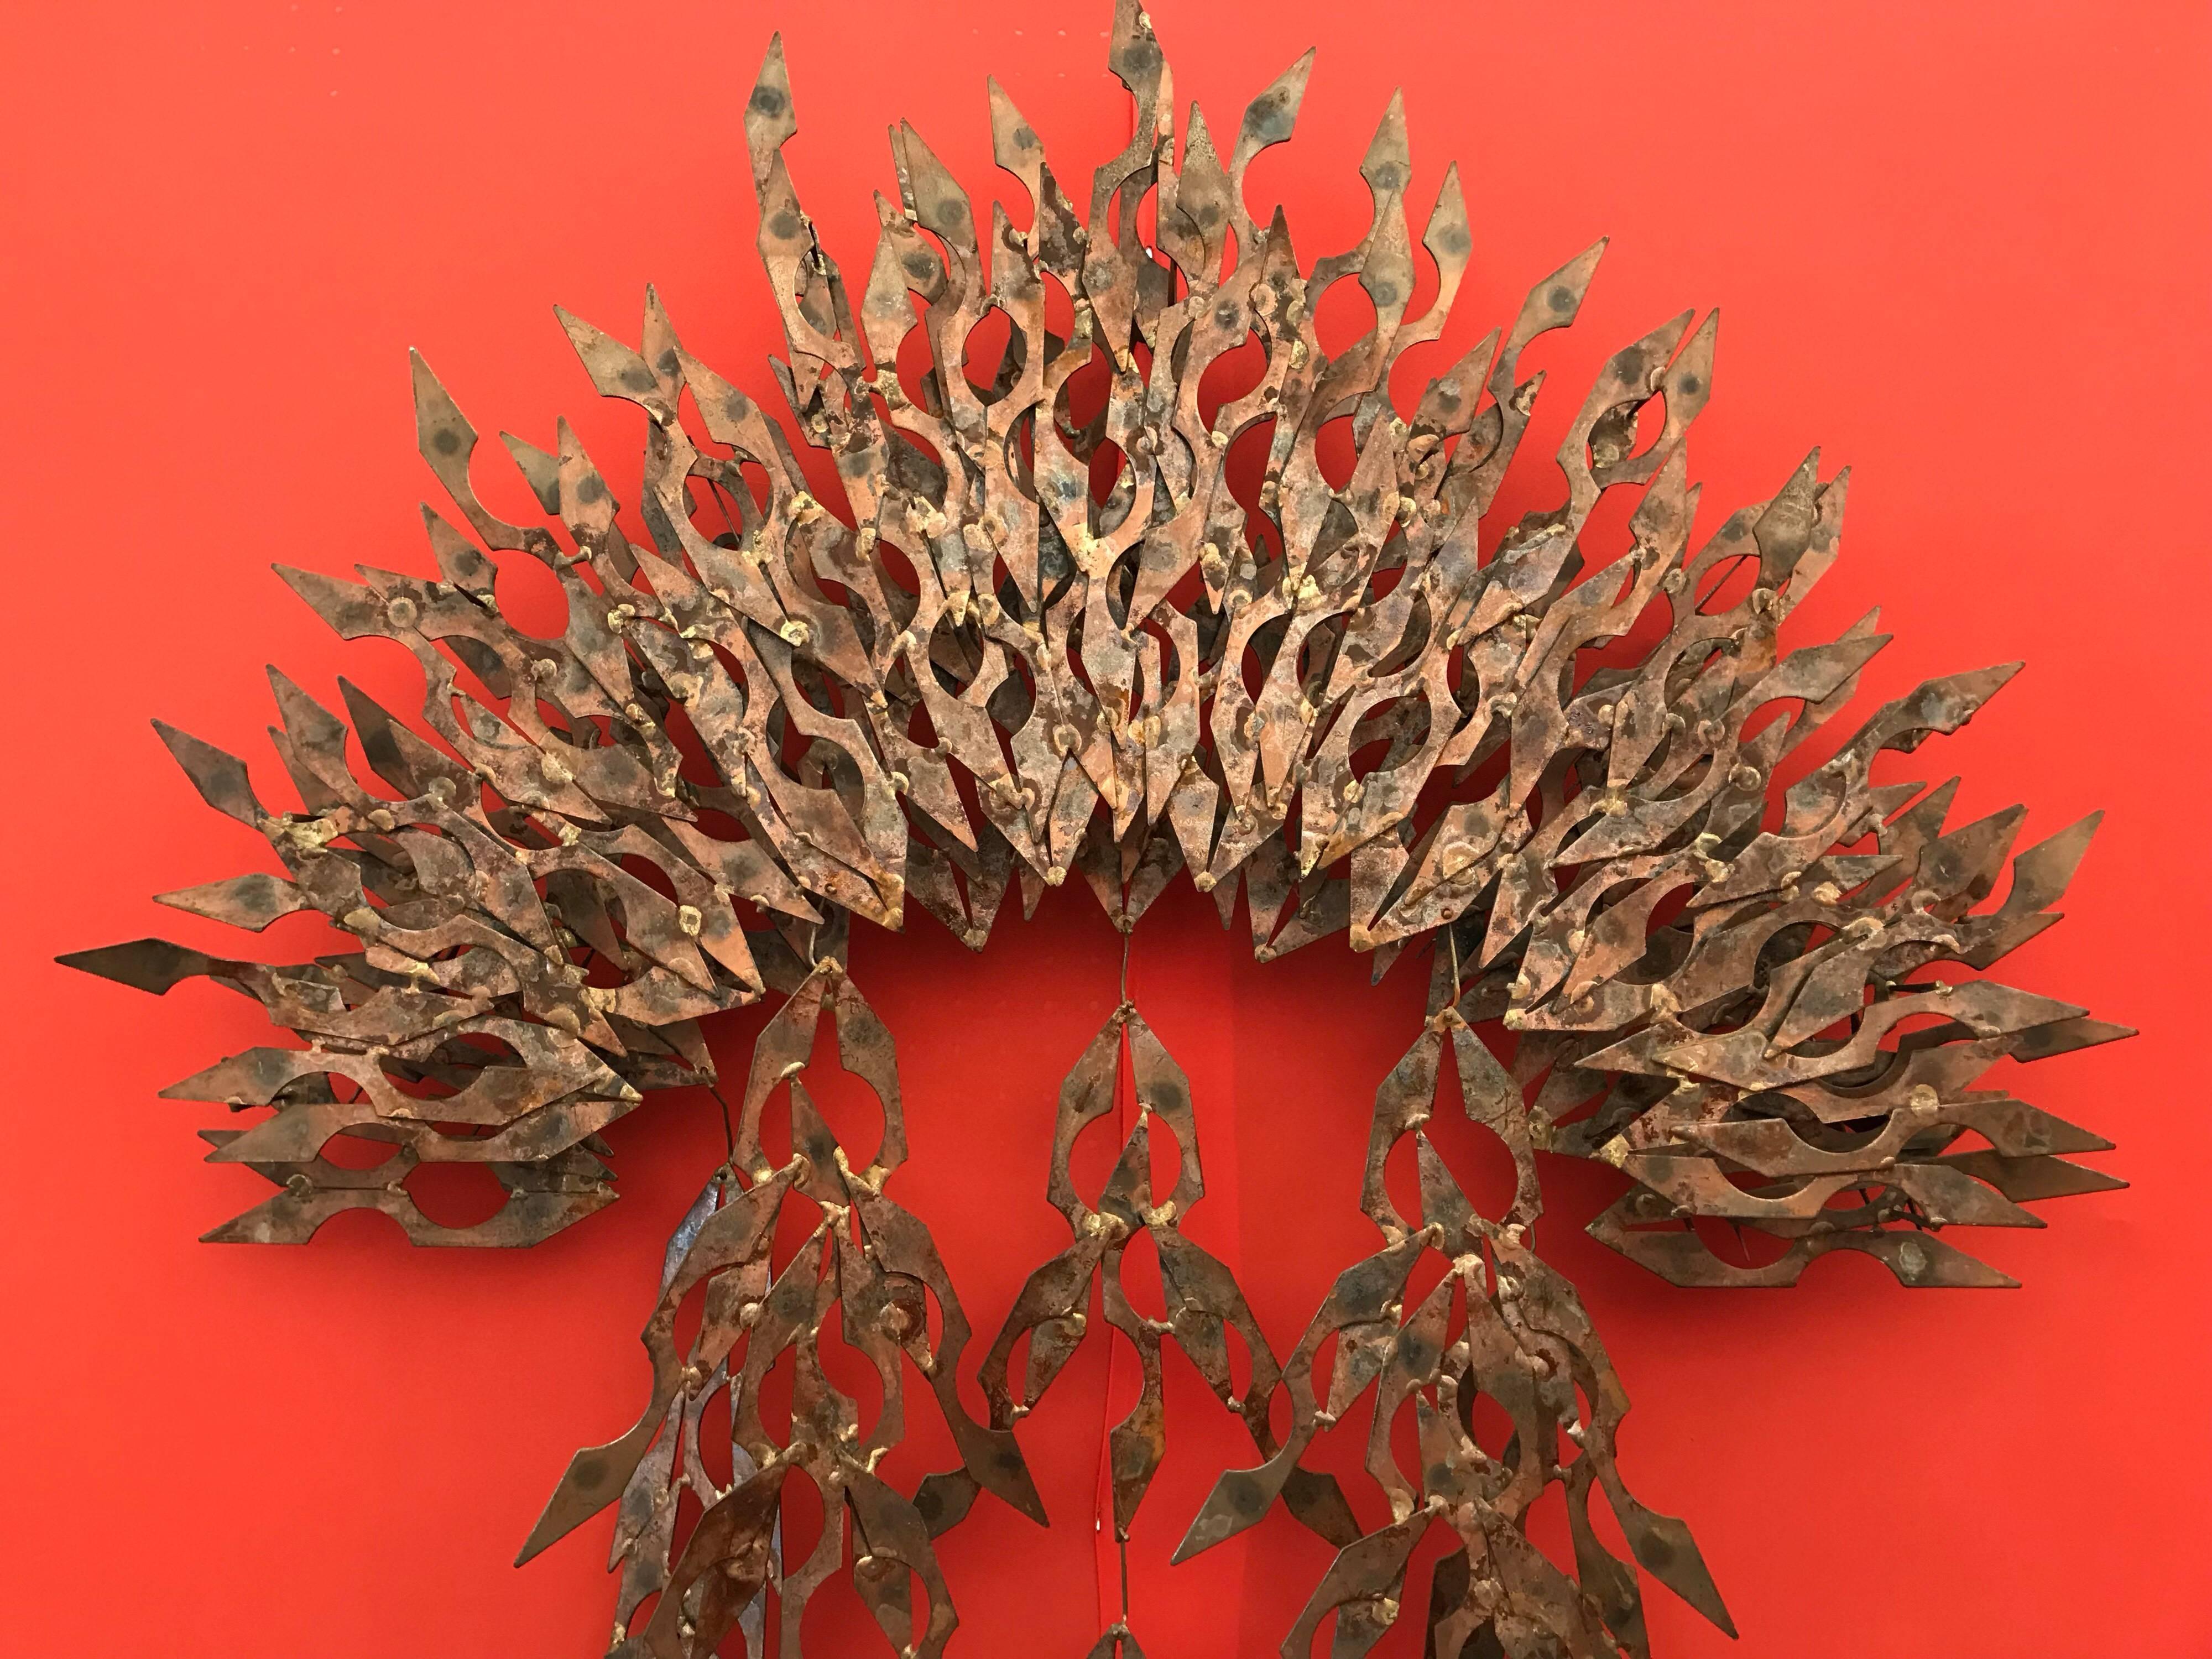 Brutalist wall sculpture of patinated metal.
Monumental Brutalist wall sculpture of patinated metal inspired by Silas Seandel.
Fabulous large Brutalist abstract wall sculpture of patinated metal in the manner of Silas Seandel/Curtis Jere/Tony